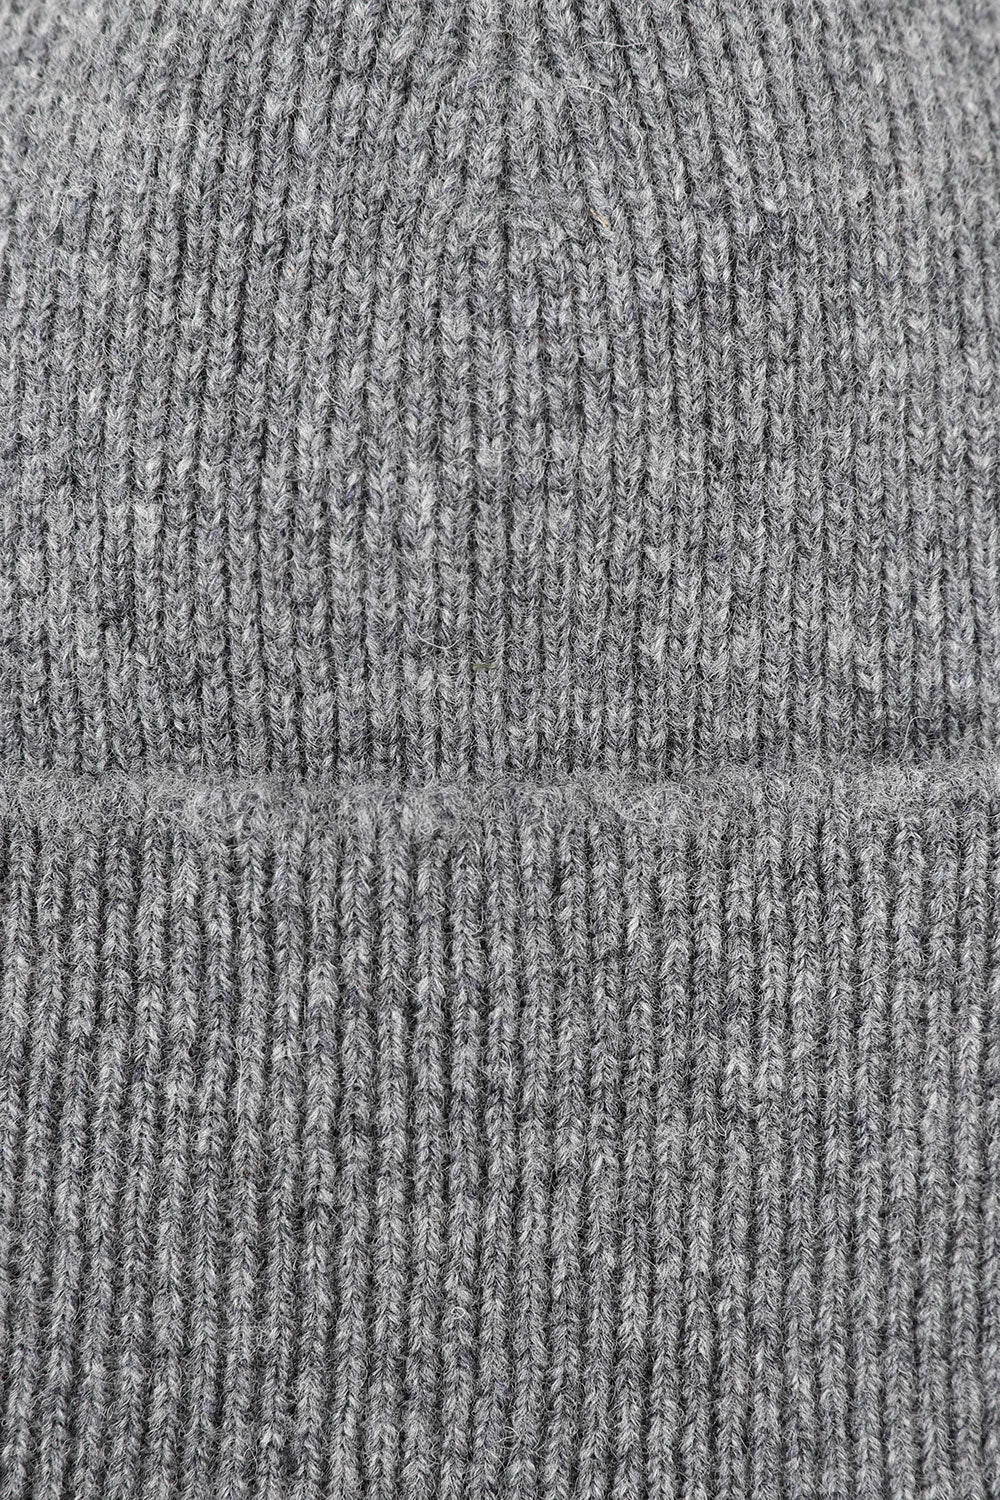 Close-up view of Uskees 4004 grey wool hat, showing the texture of the natural lambswool.